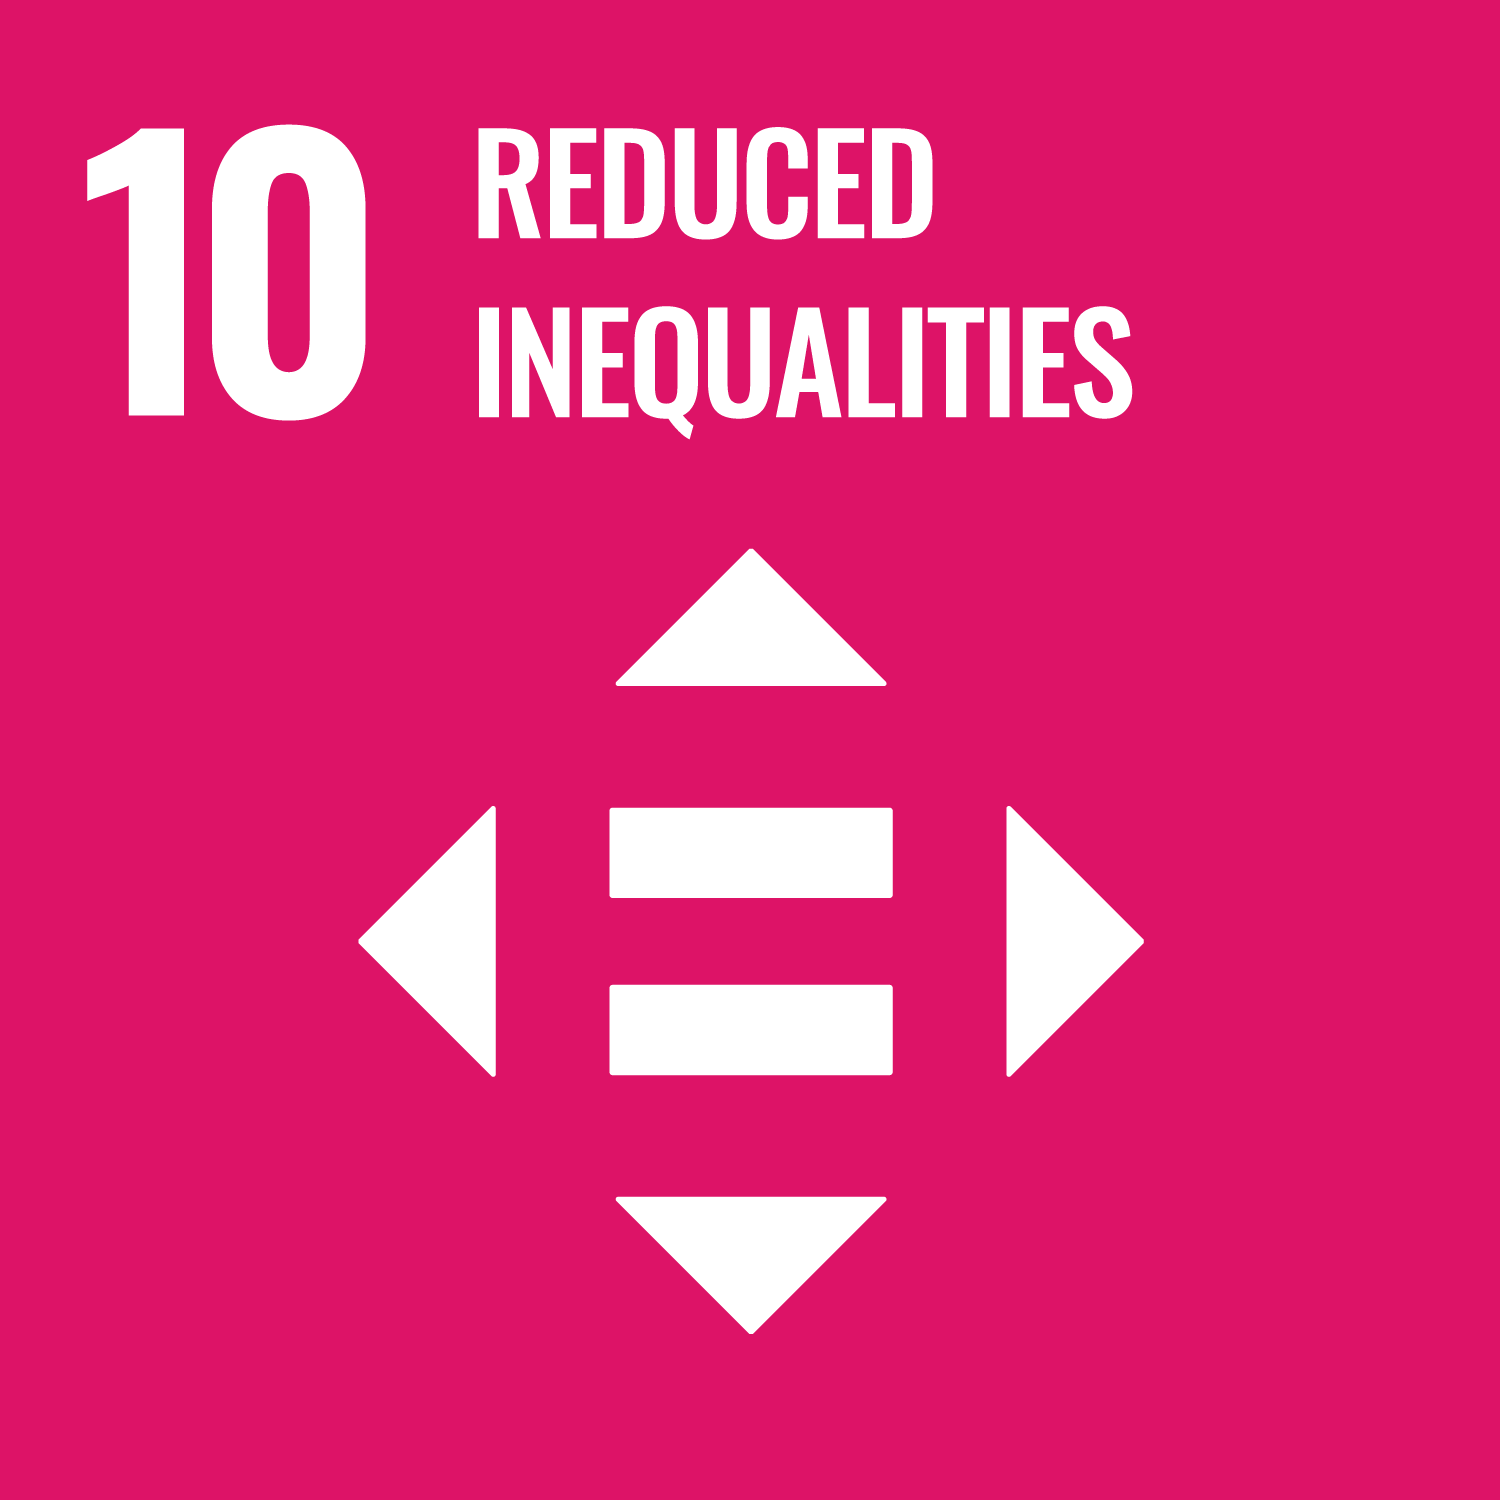 Goal Ten: Reduce inequality within and among countries